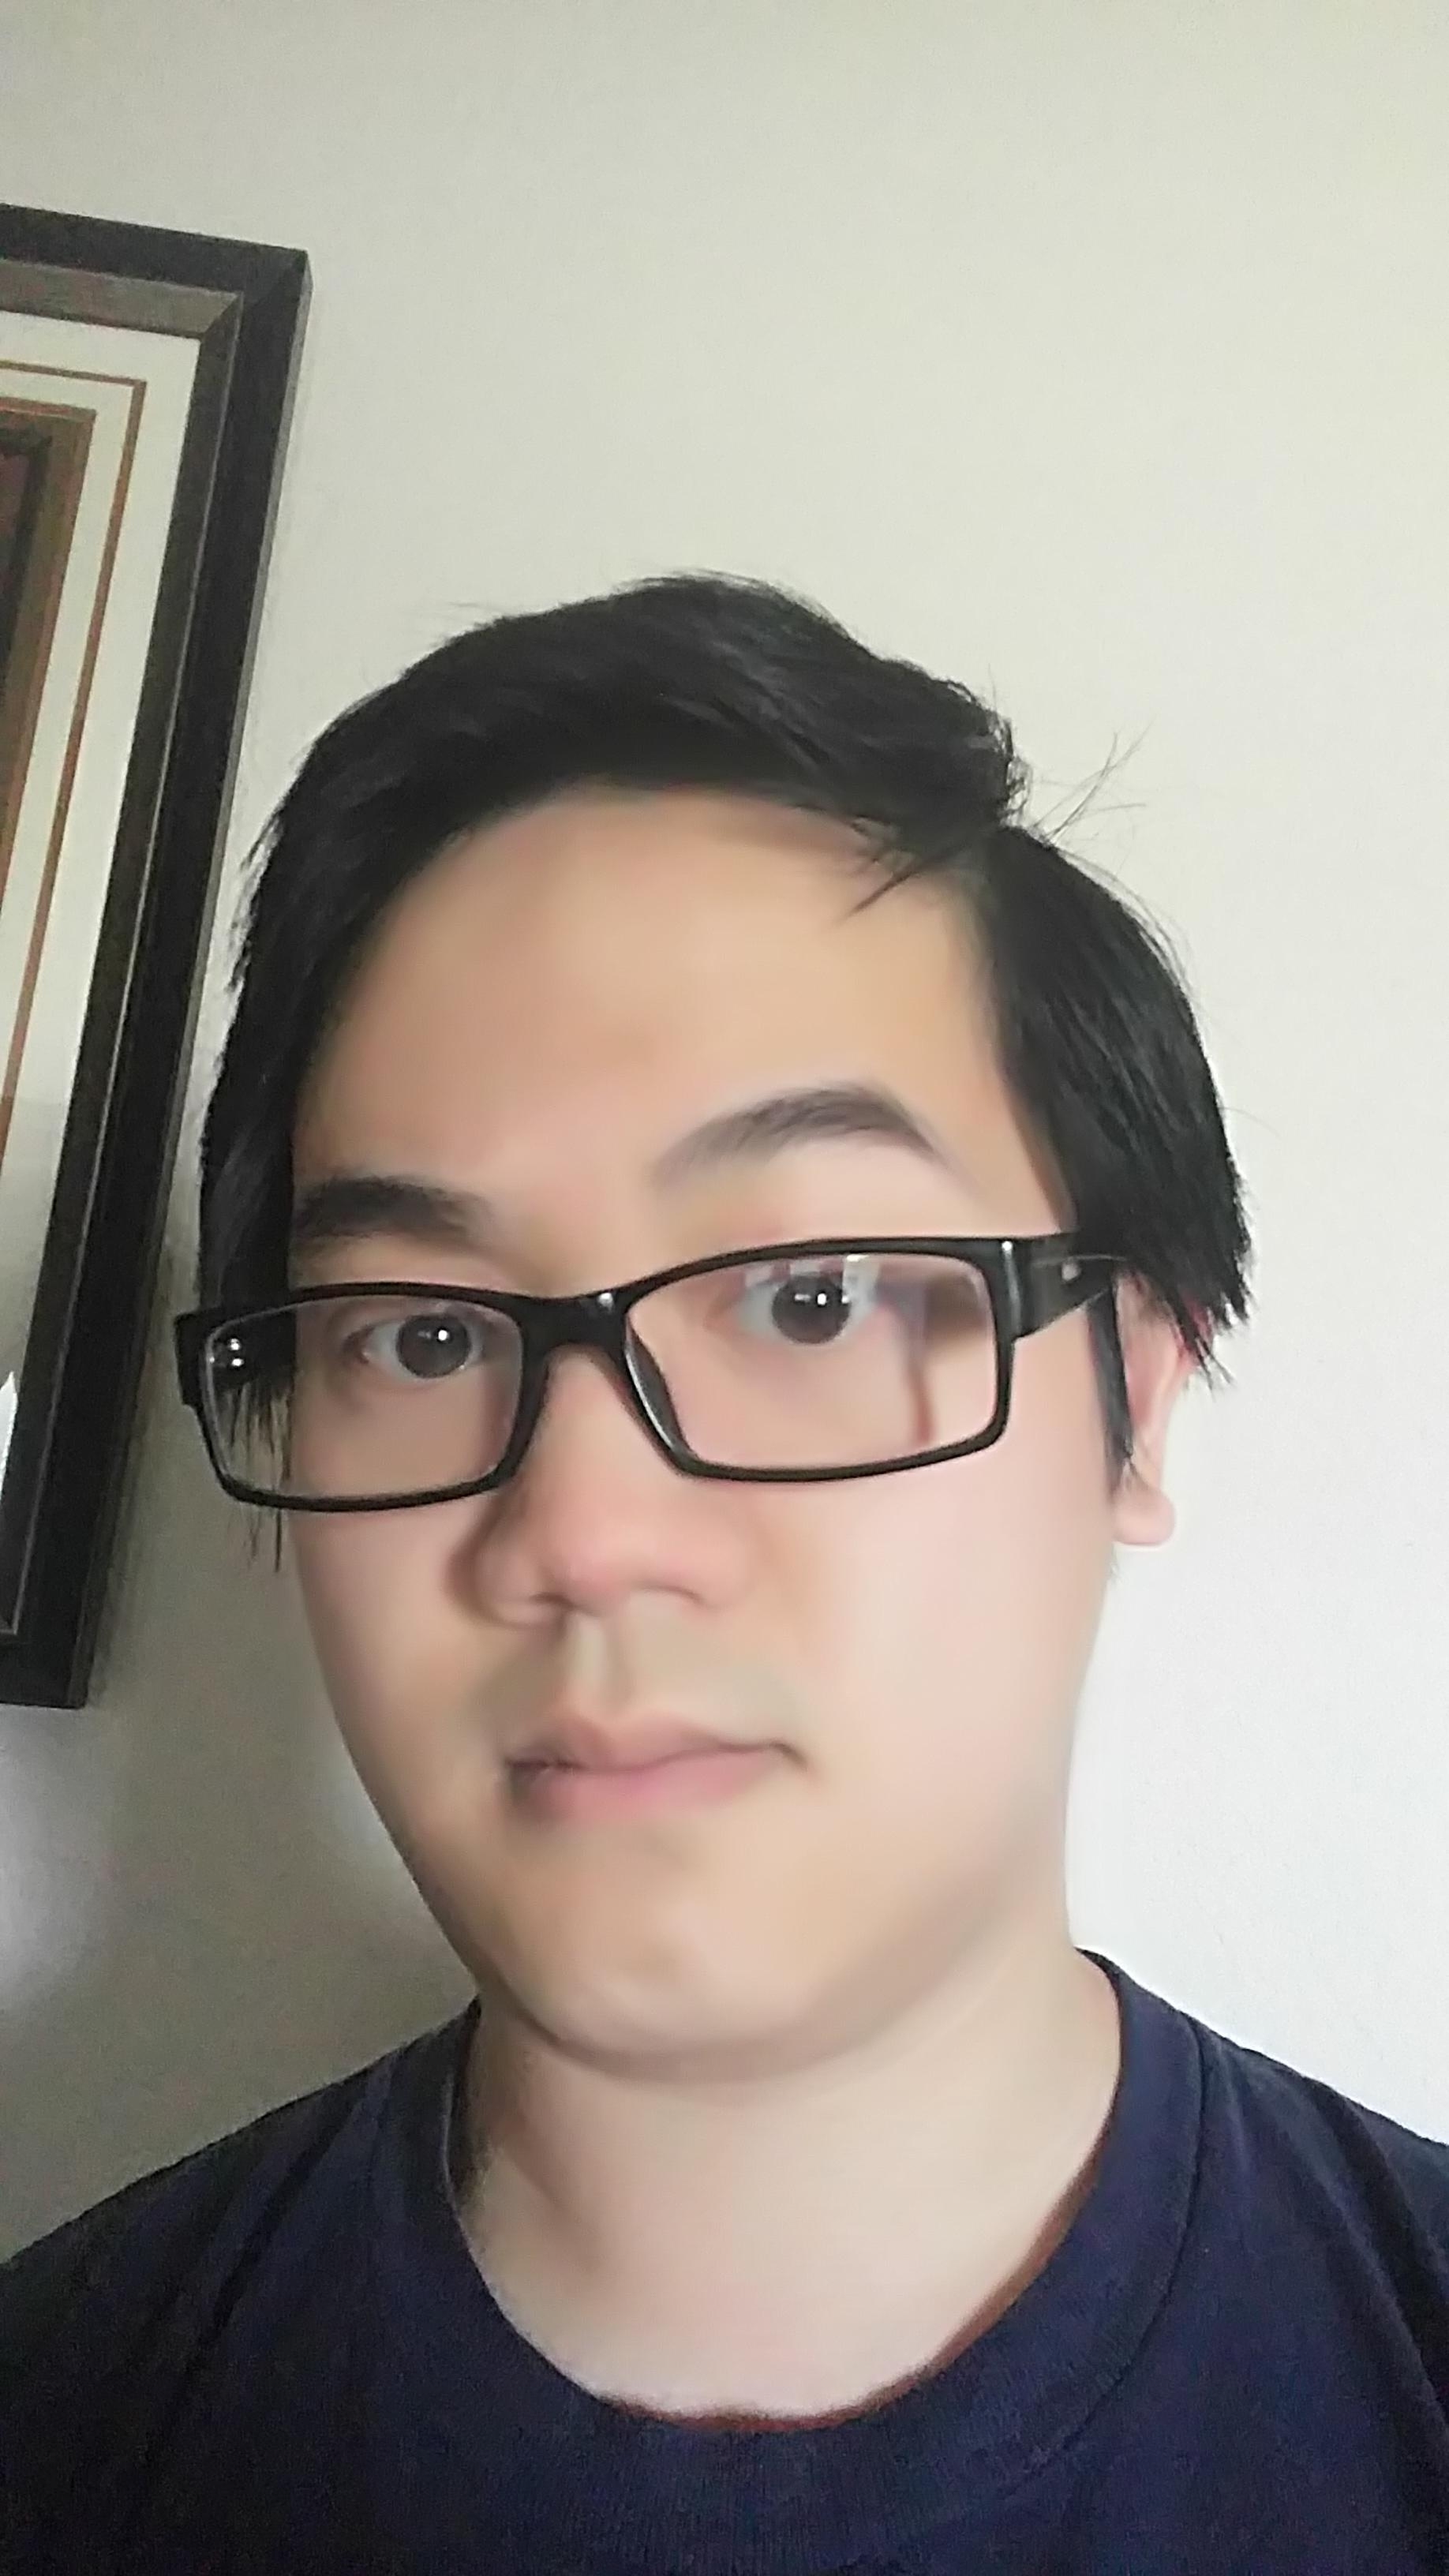 Asian Hair, My Sides Keep Bothering Me : Malehairadvice pertaining to Best Asian Male Hairstyles Reddit